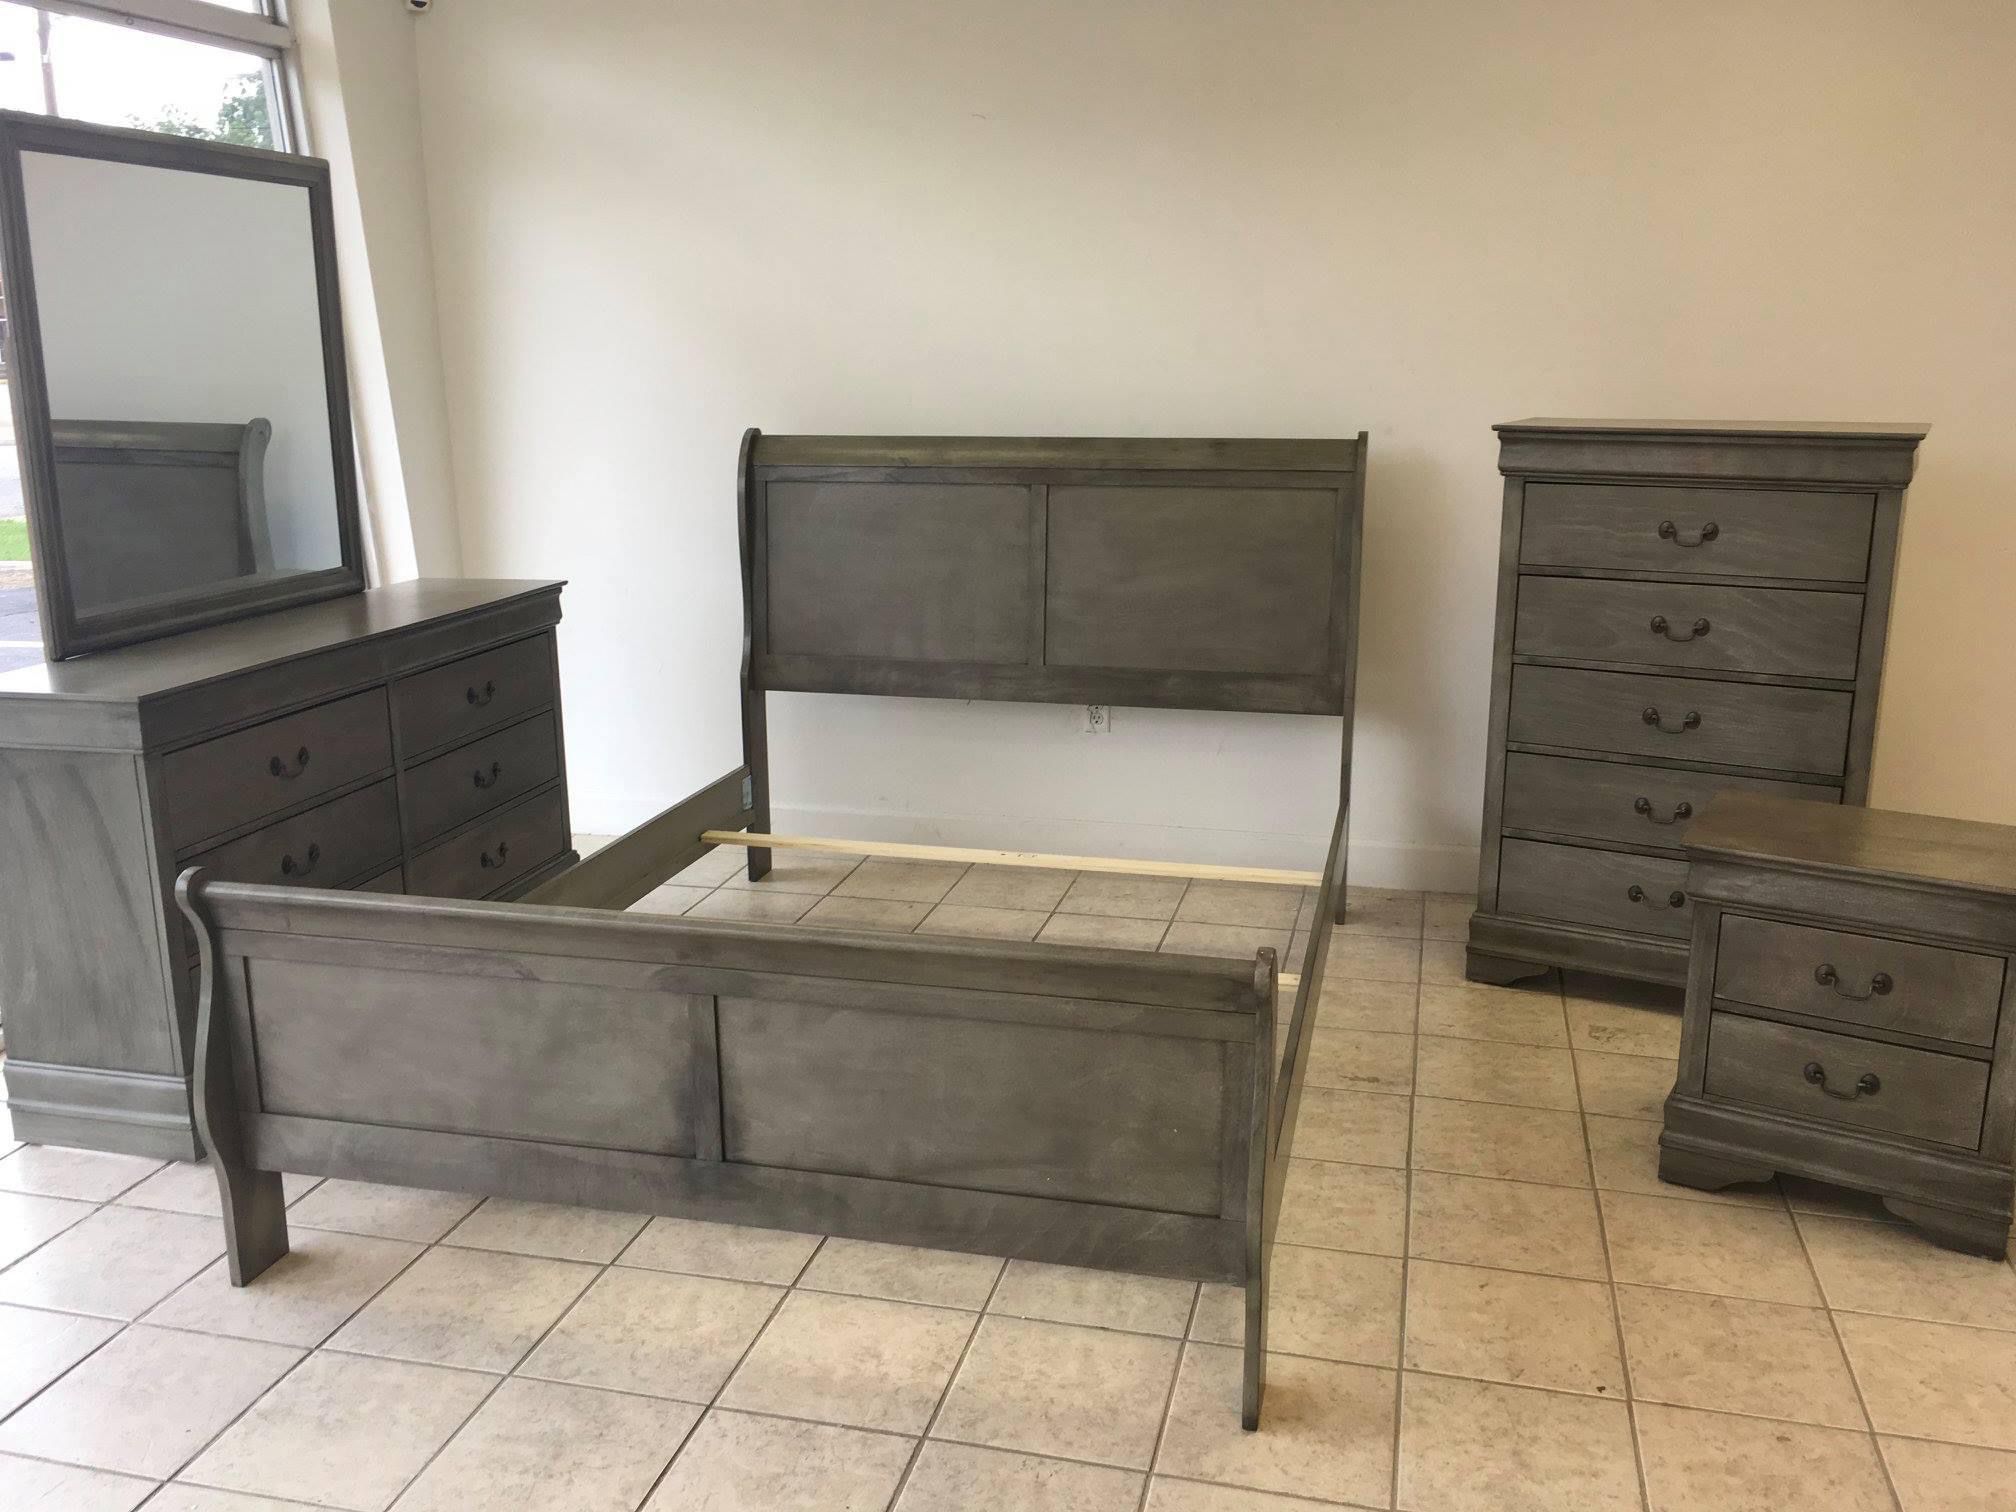 $999 - King bed frame, dresser and mirror / Brand New 